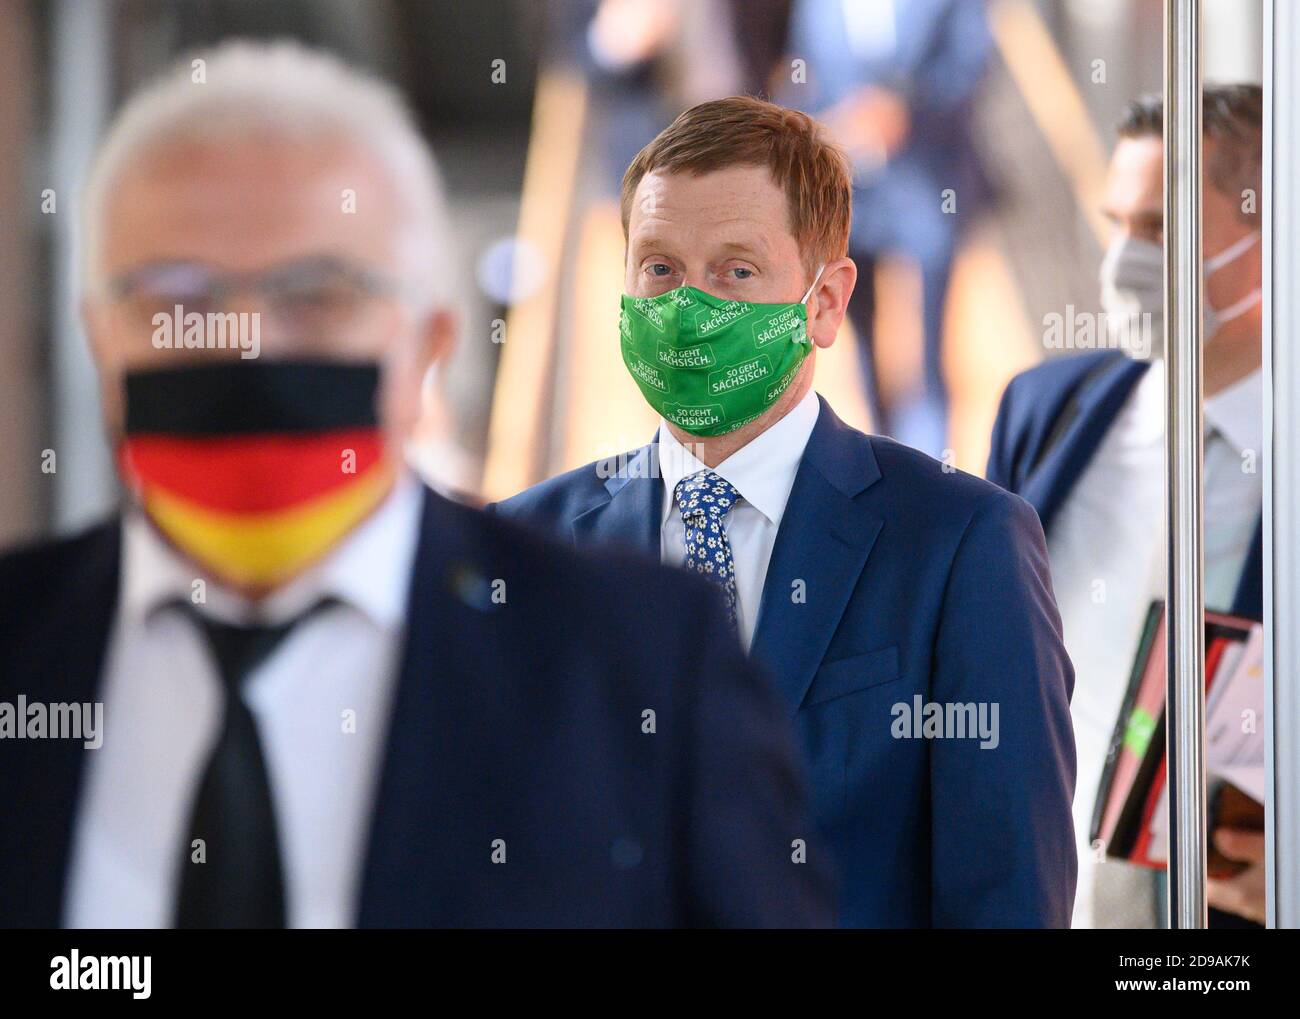 Dresden, Germany. 04th Nov, 2020. Michael Kretschmer (CDU), Prime Minister of Saxony, comes to the plenary hall before the start of the session of the Saxon state parliament and his government declaration on the Corona pandemic. Credit: Robert Michael/dpa-Zentralbild/dpa/Alamy Live News Stock Photo